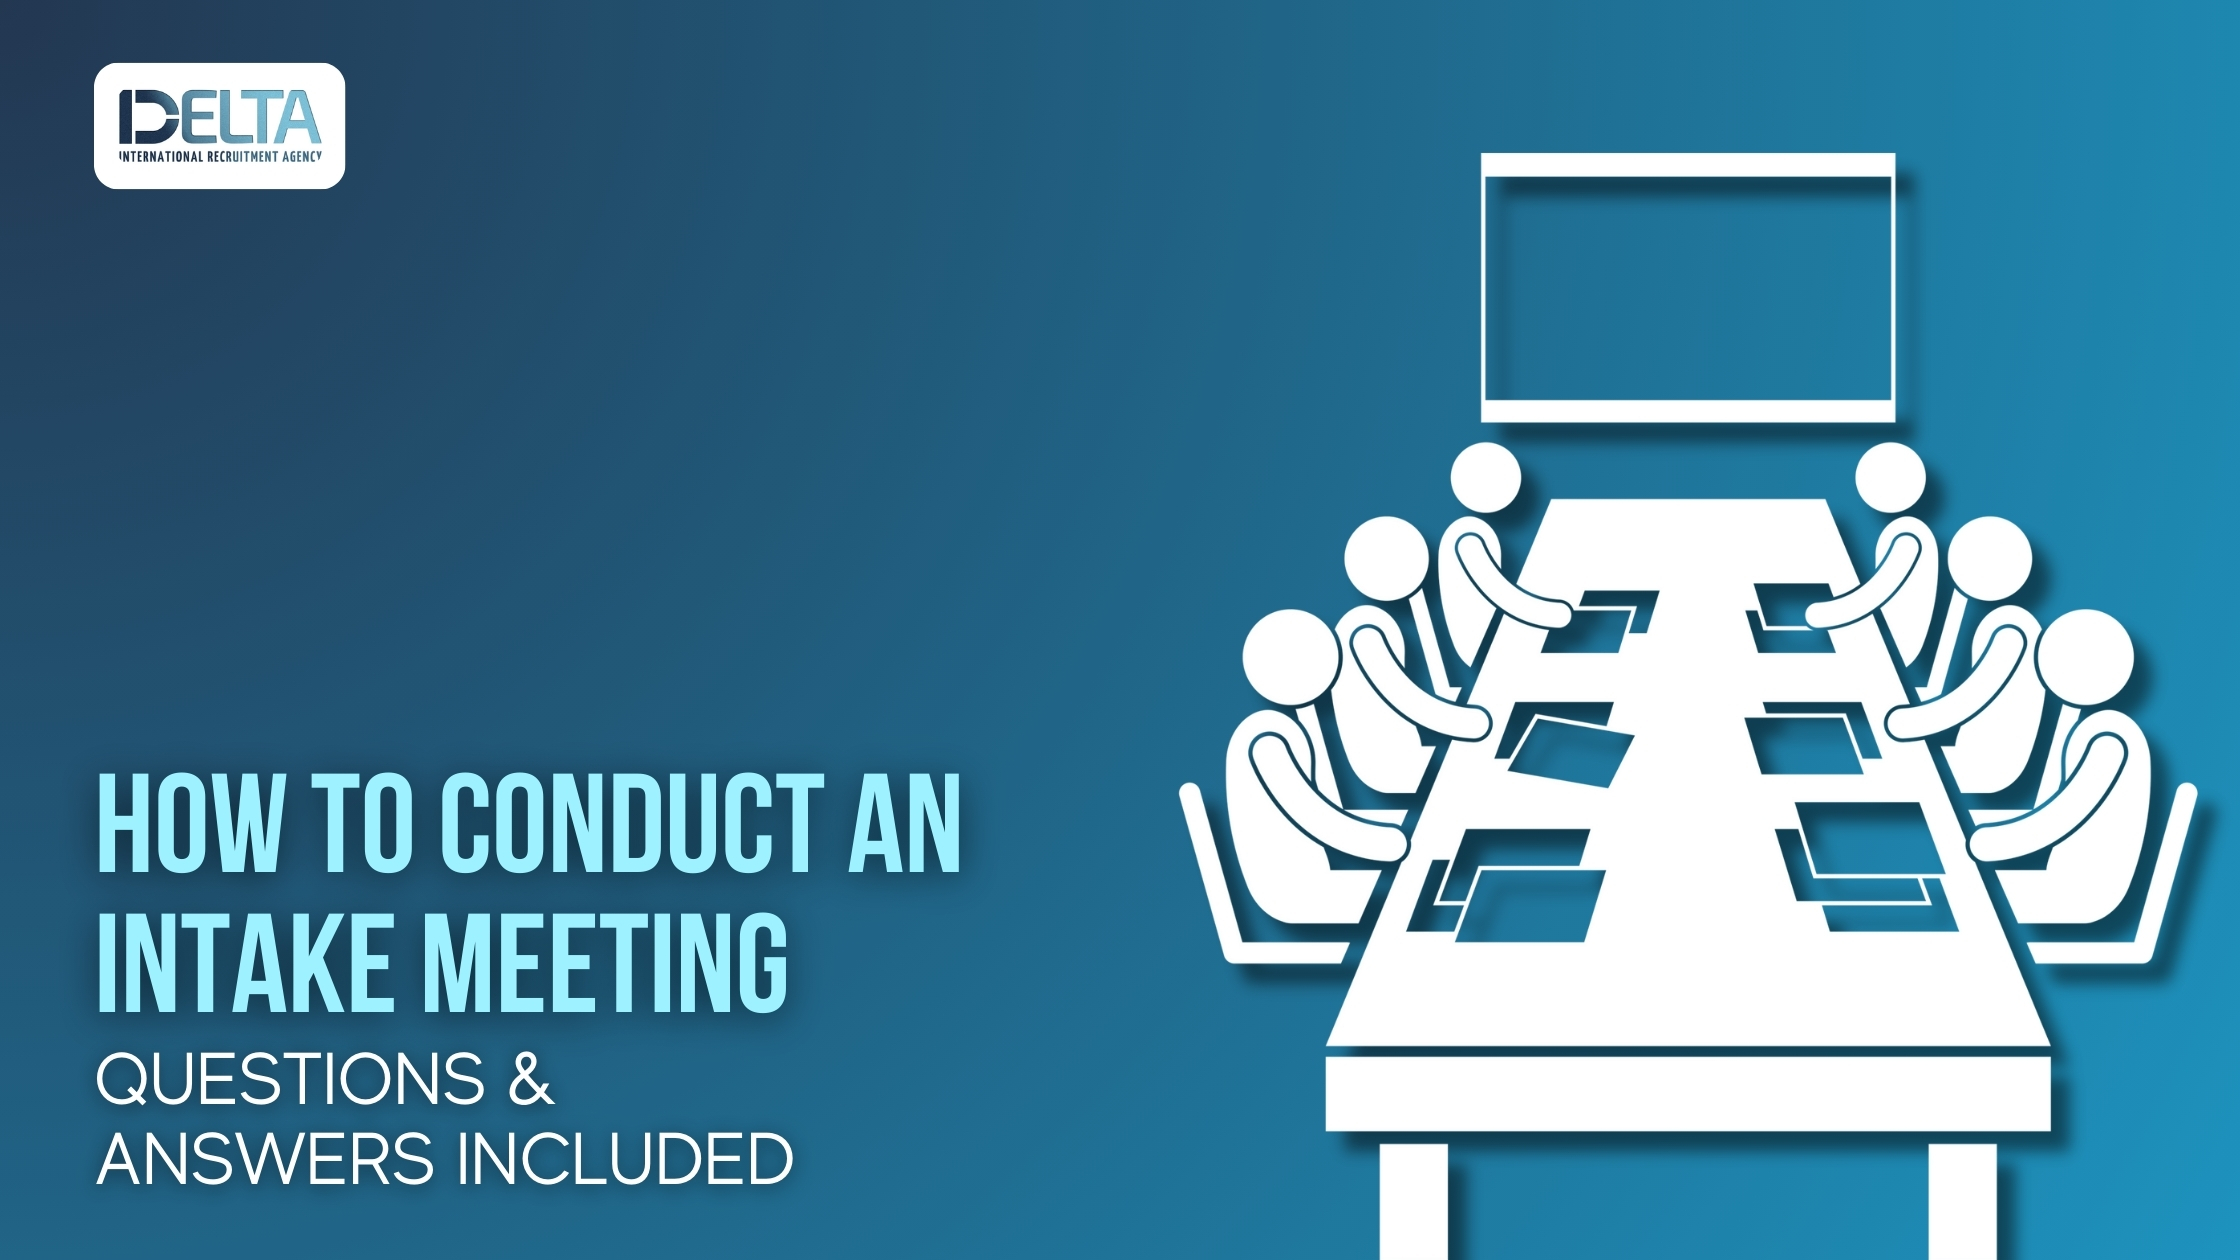 How to Conduct an Intake Meeting: Questions & Answers Included